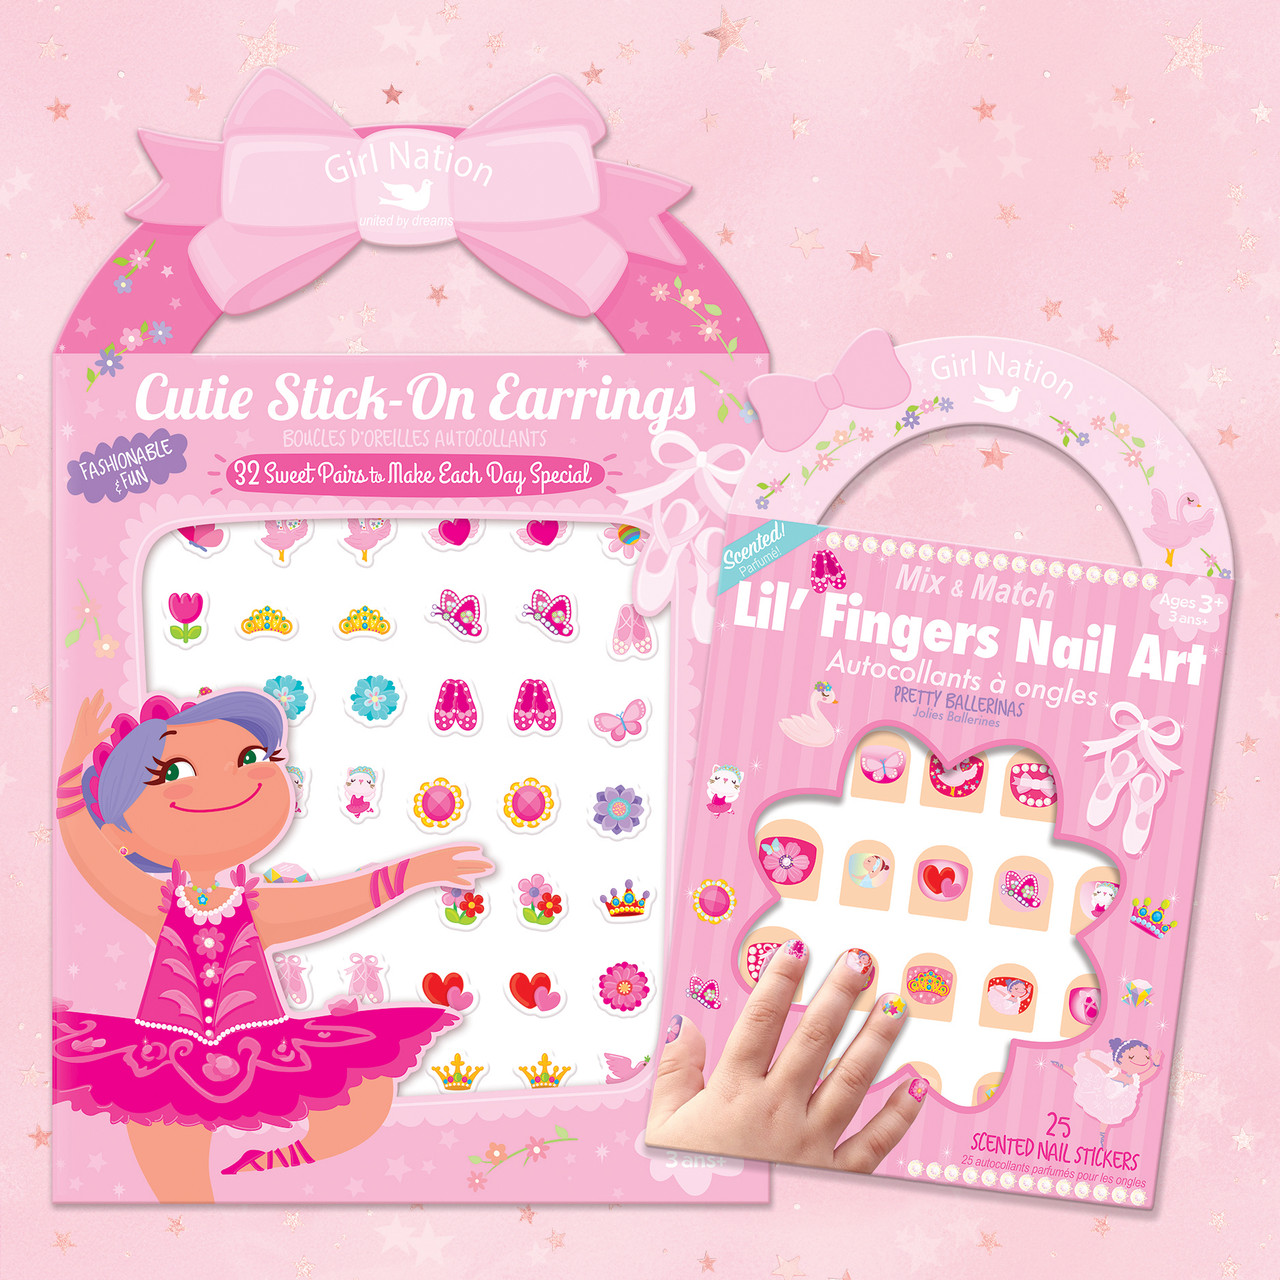 Cutie Stick-On Earring and Nail Sticker Gift Set- Sweet Shop